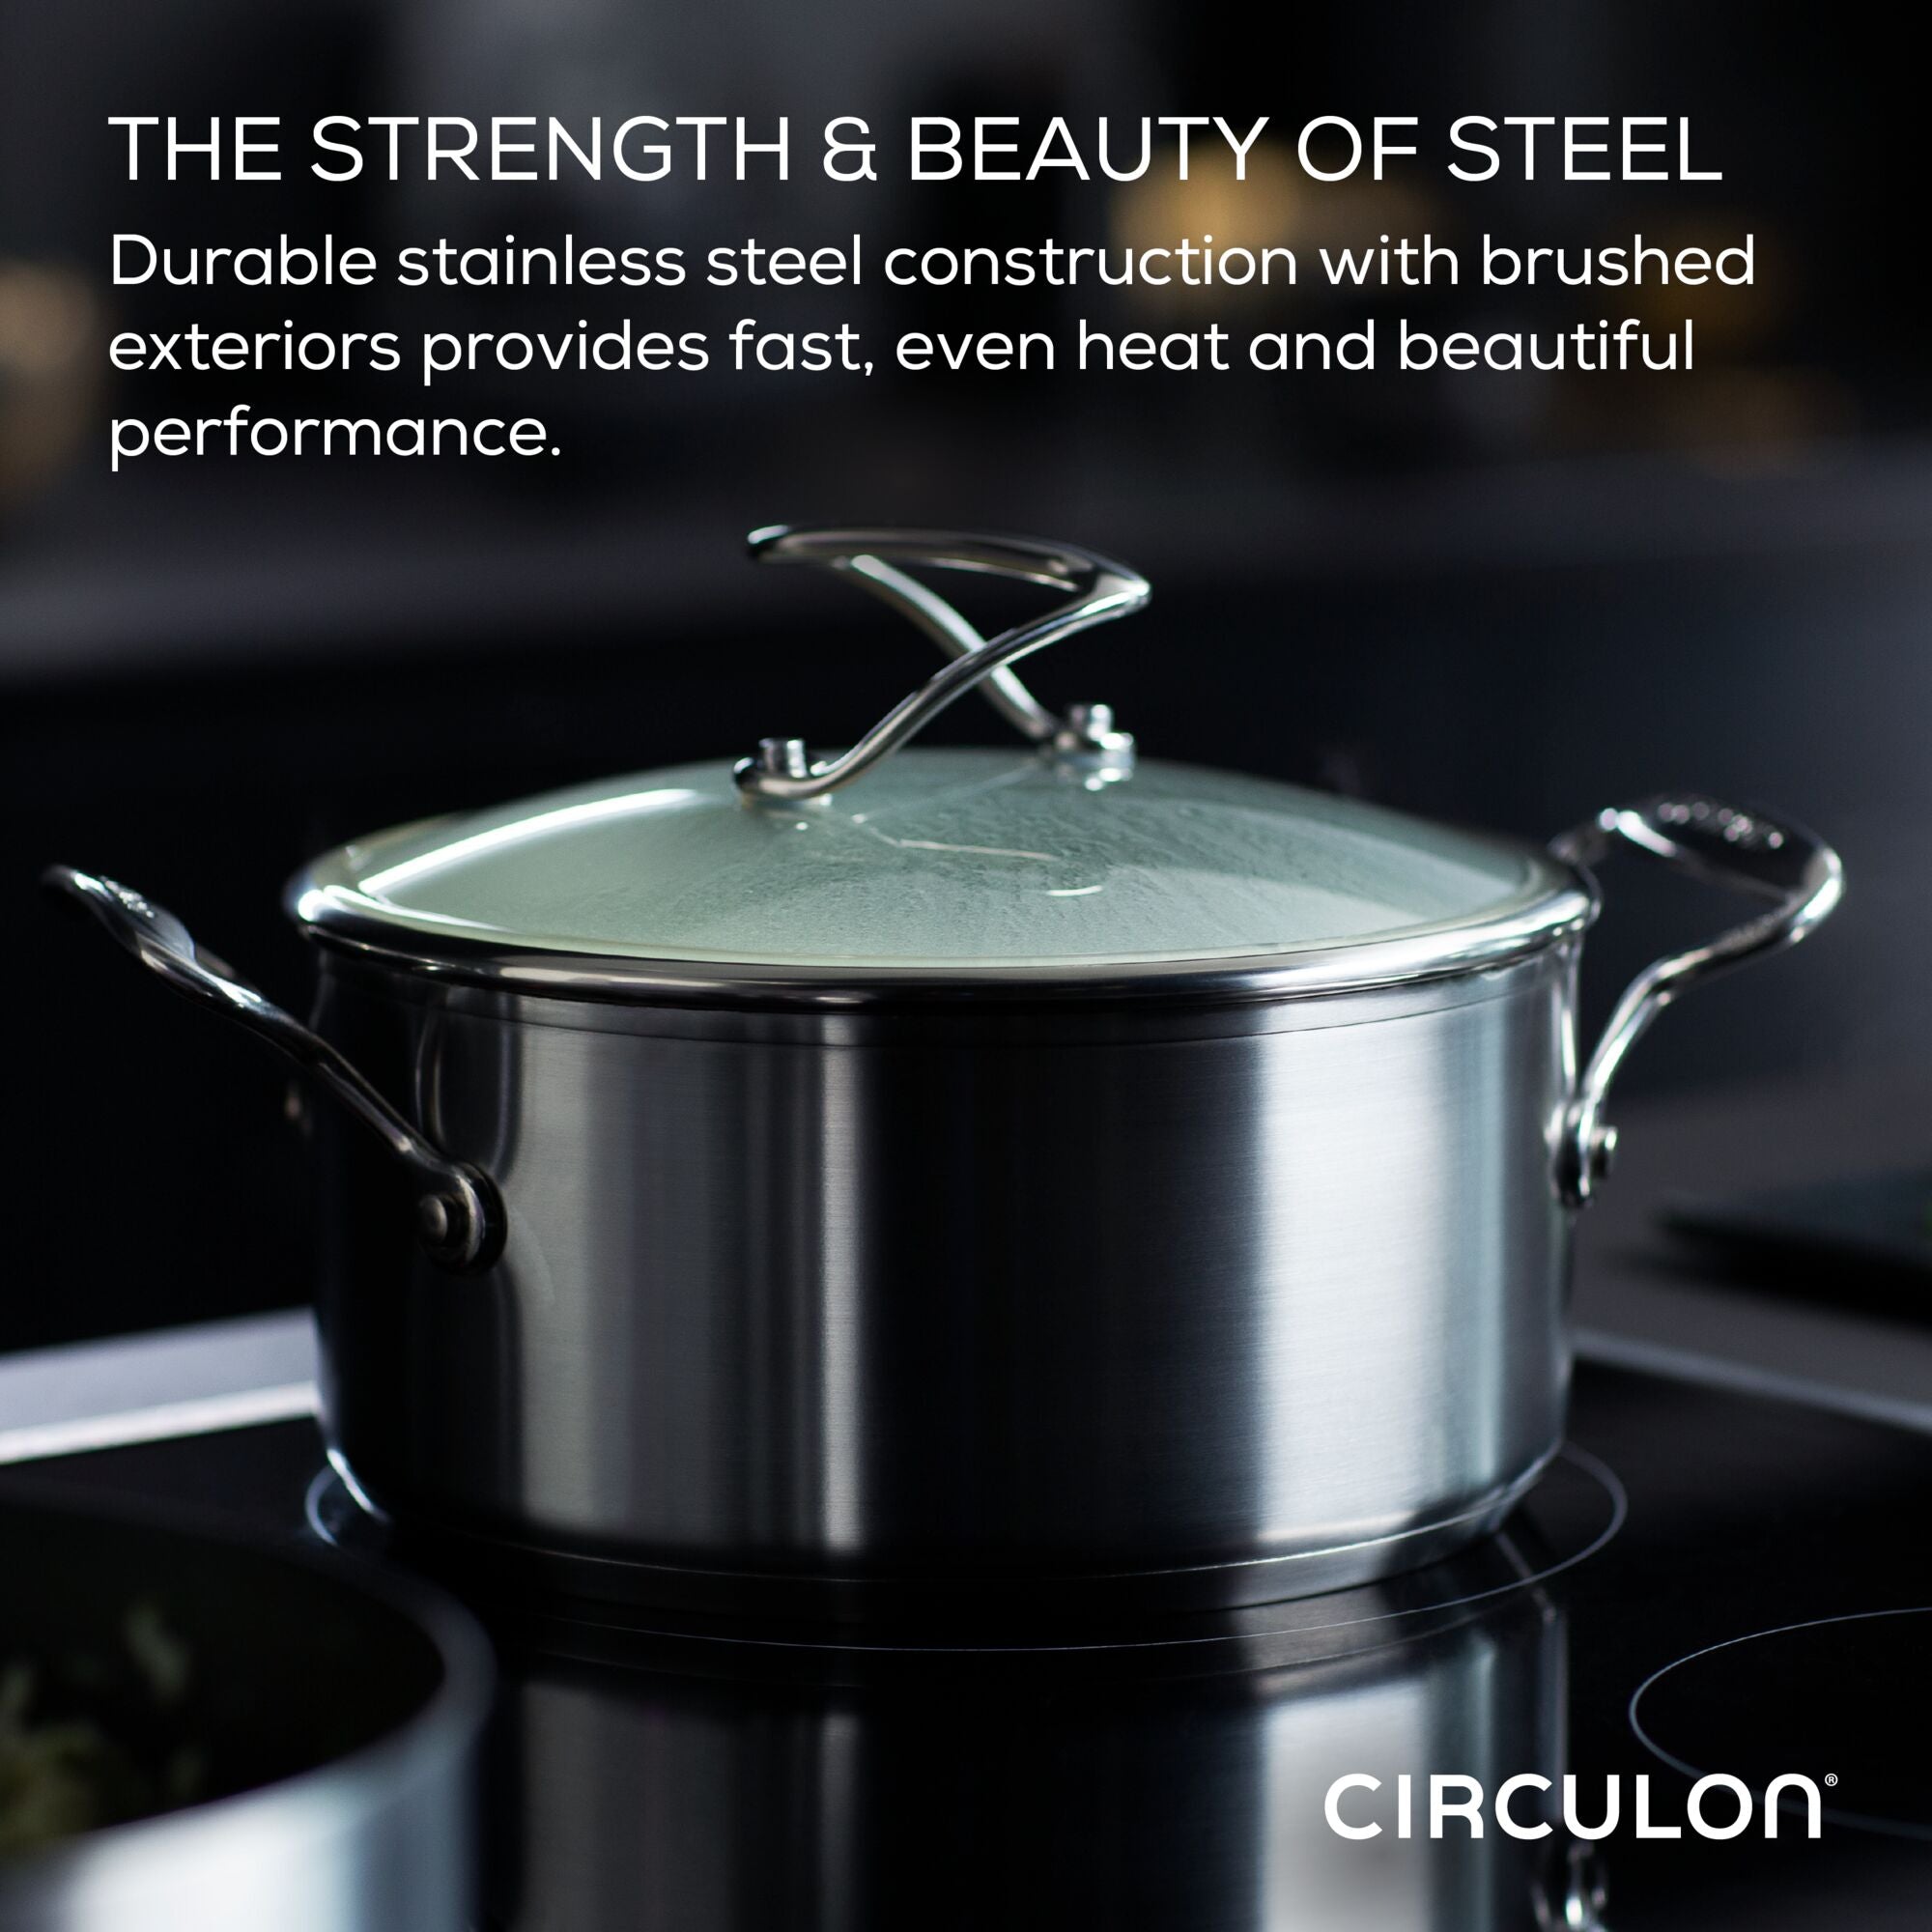 Circulon Clad Stainless Steel Wok/Stir Fry with Glass Lid and Hybrid  SteelShield and Nonstick Technology, 14 Inch - Silver